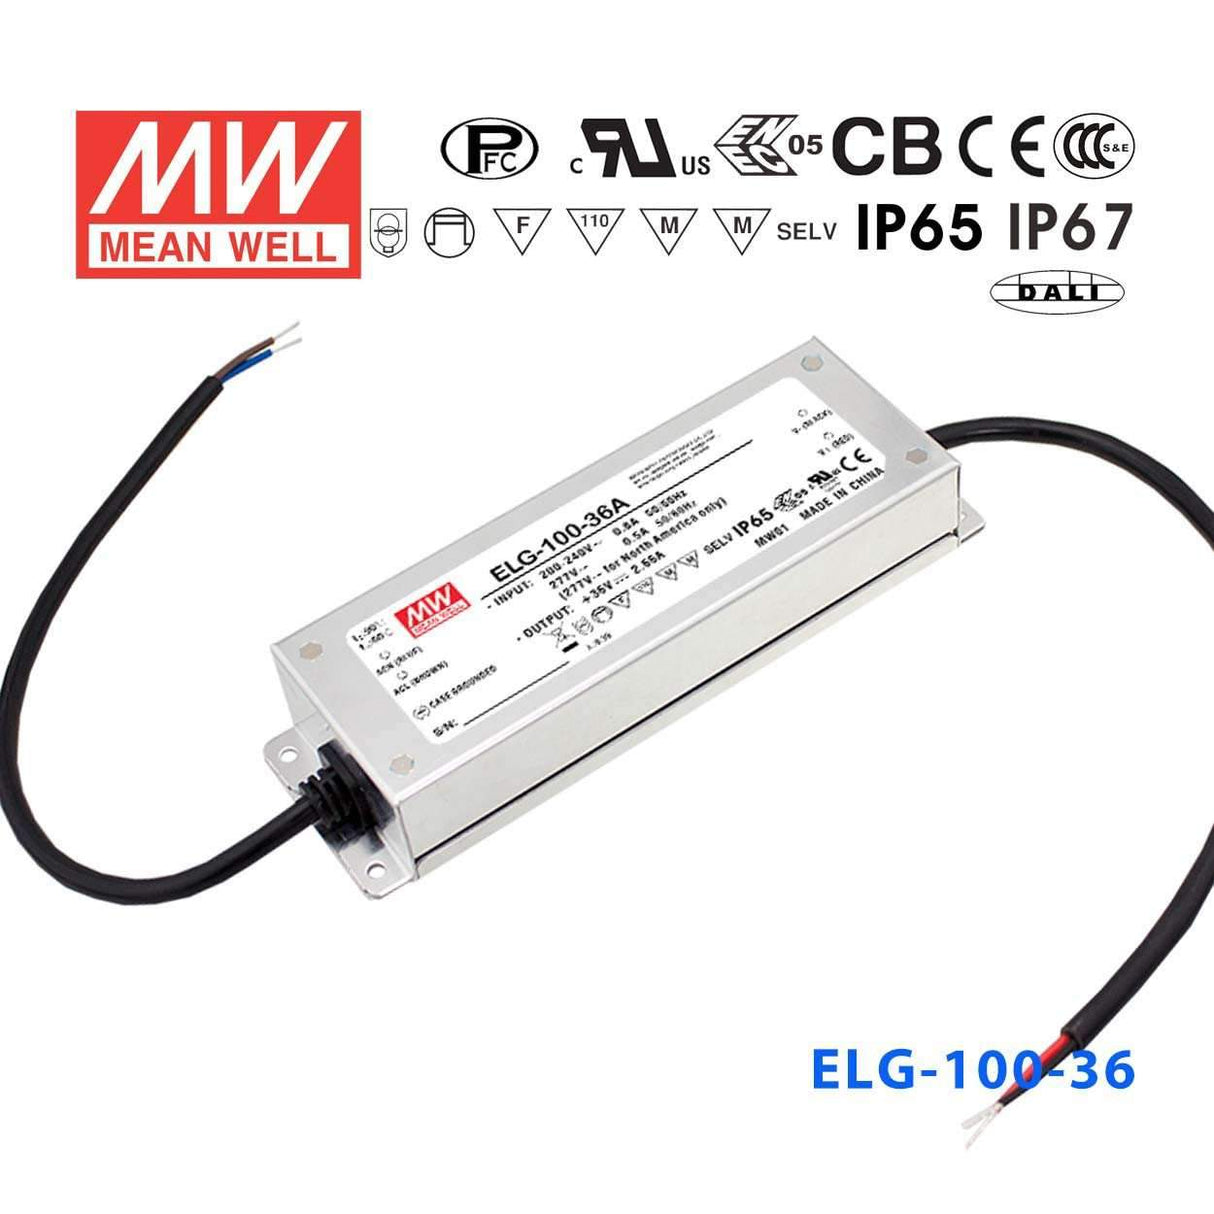 Mean Well ELG-100-36 Power Supply 95.76W 36V